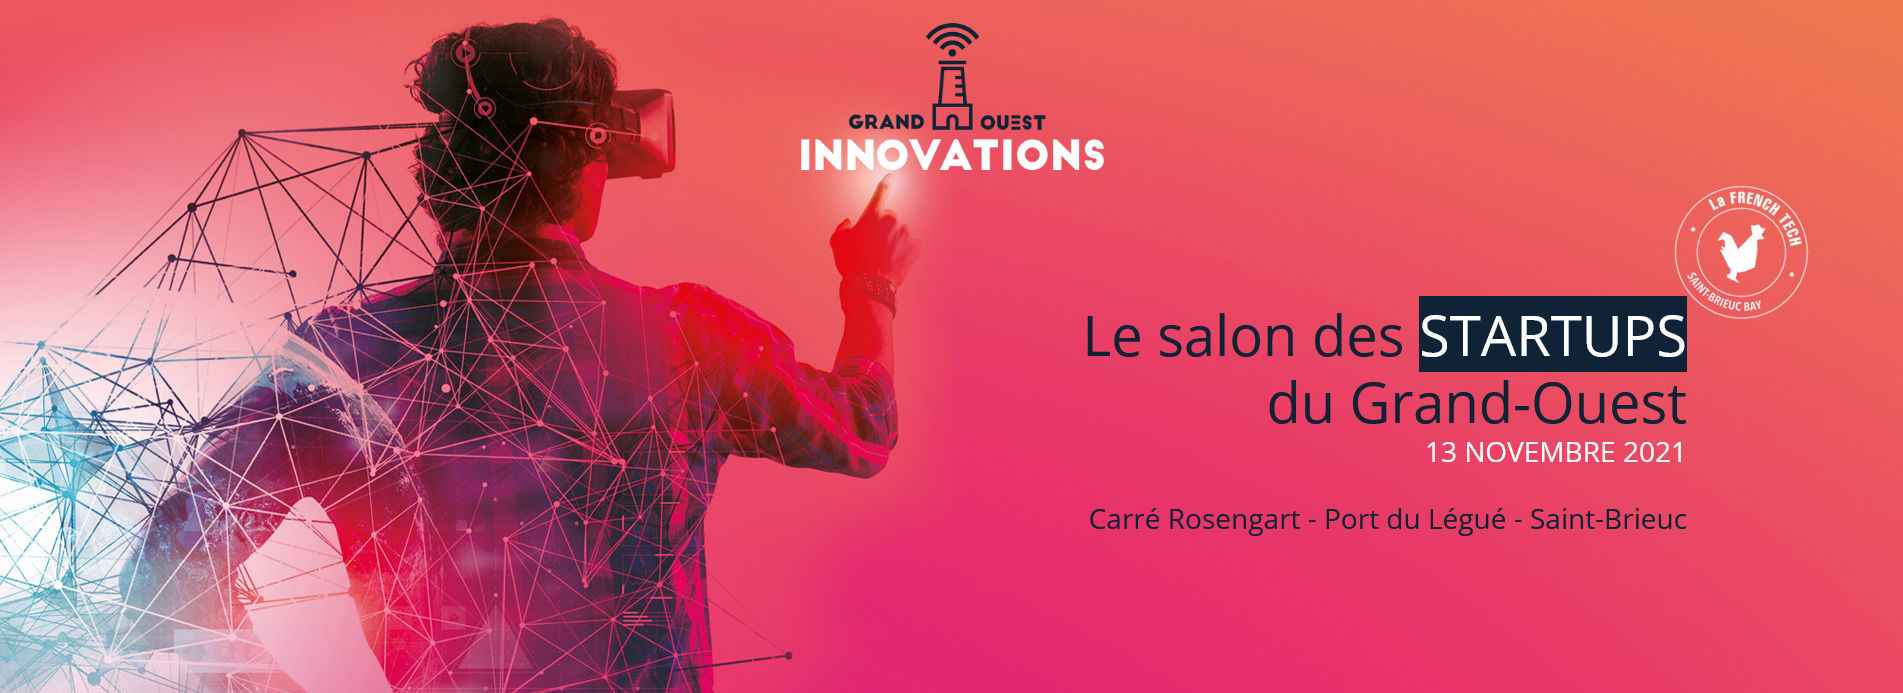 Grand ouest innovation